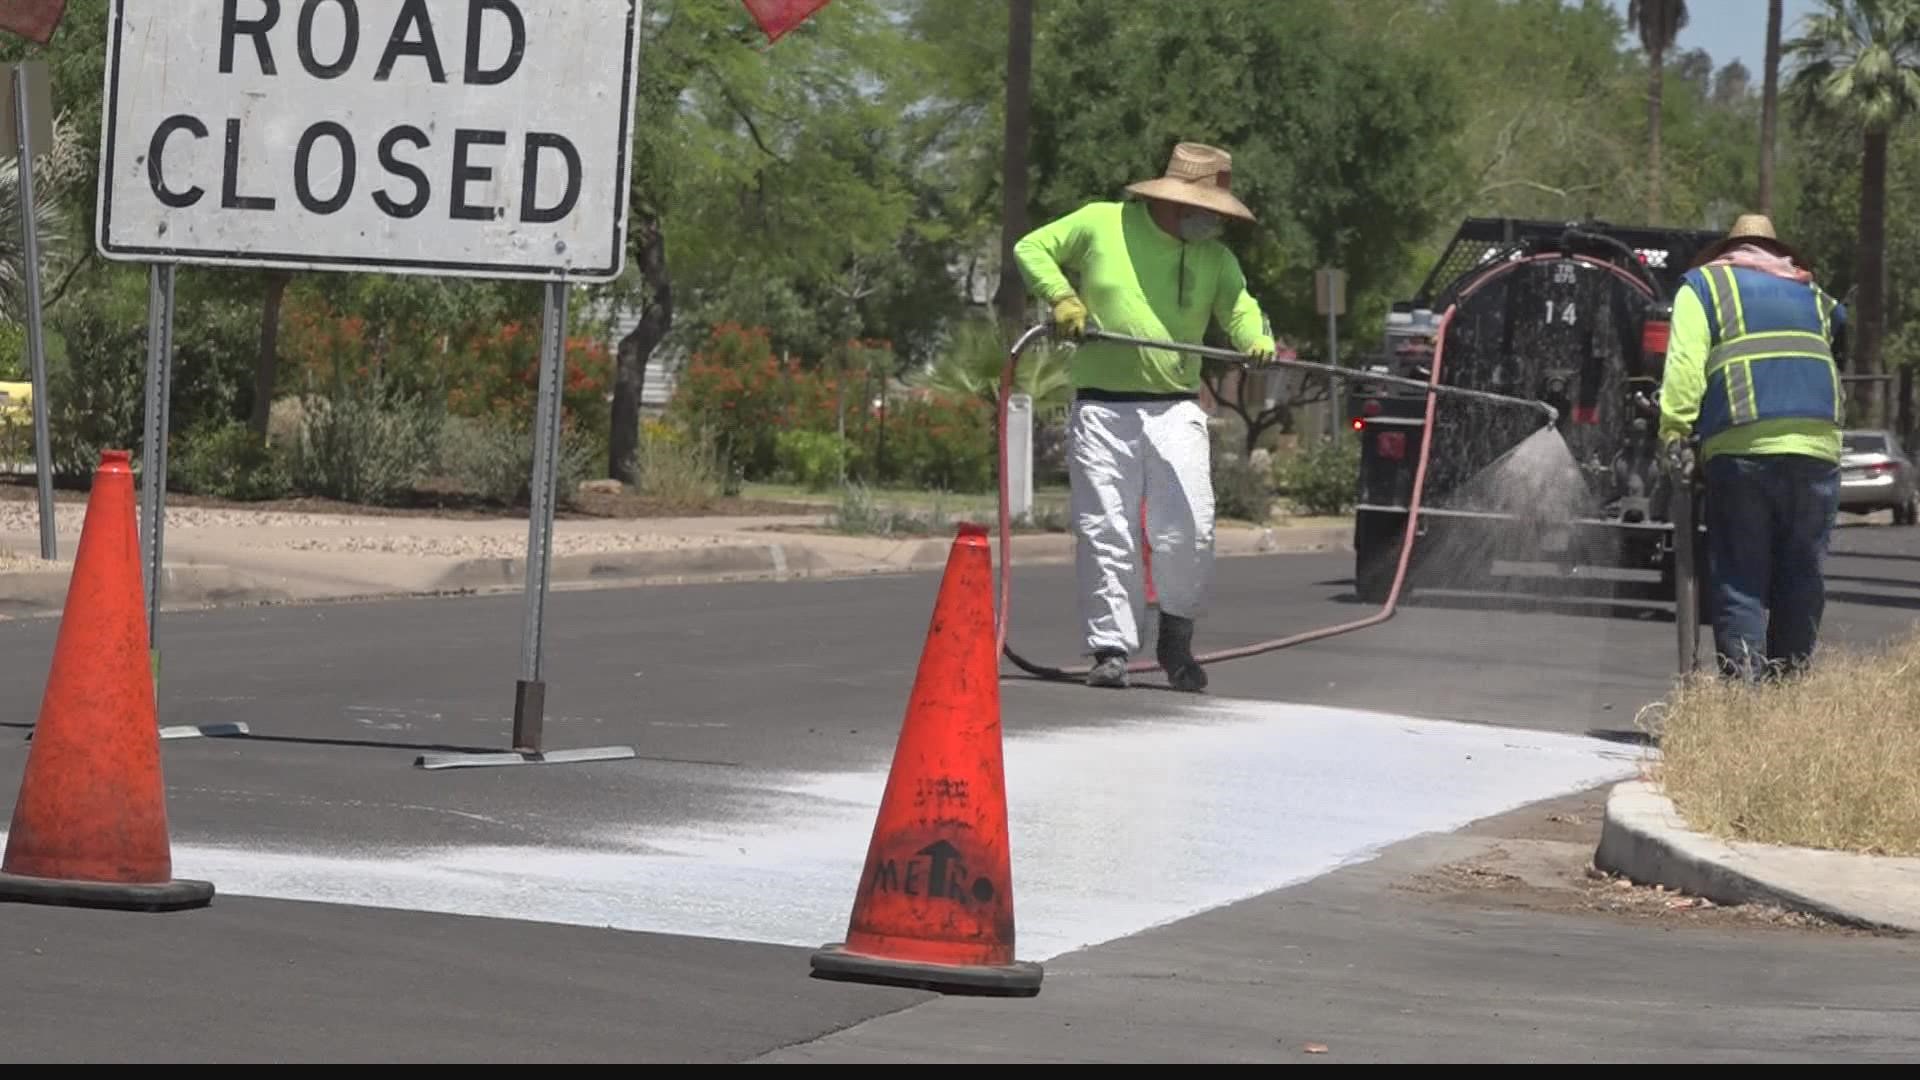 Phoenix summers are brutal. The city is installing pavement that helps reflect heat instead of absorbing it. The results are meant to combat the heat island effect.